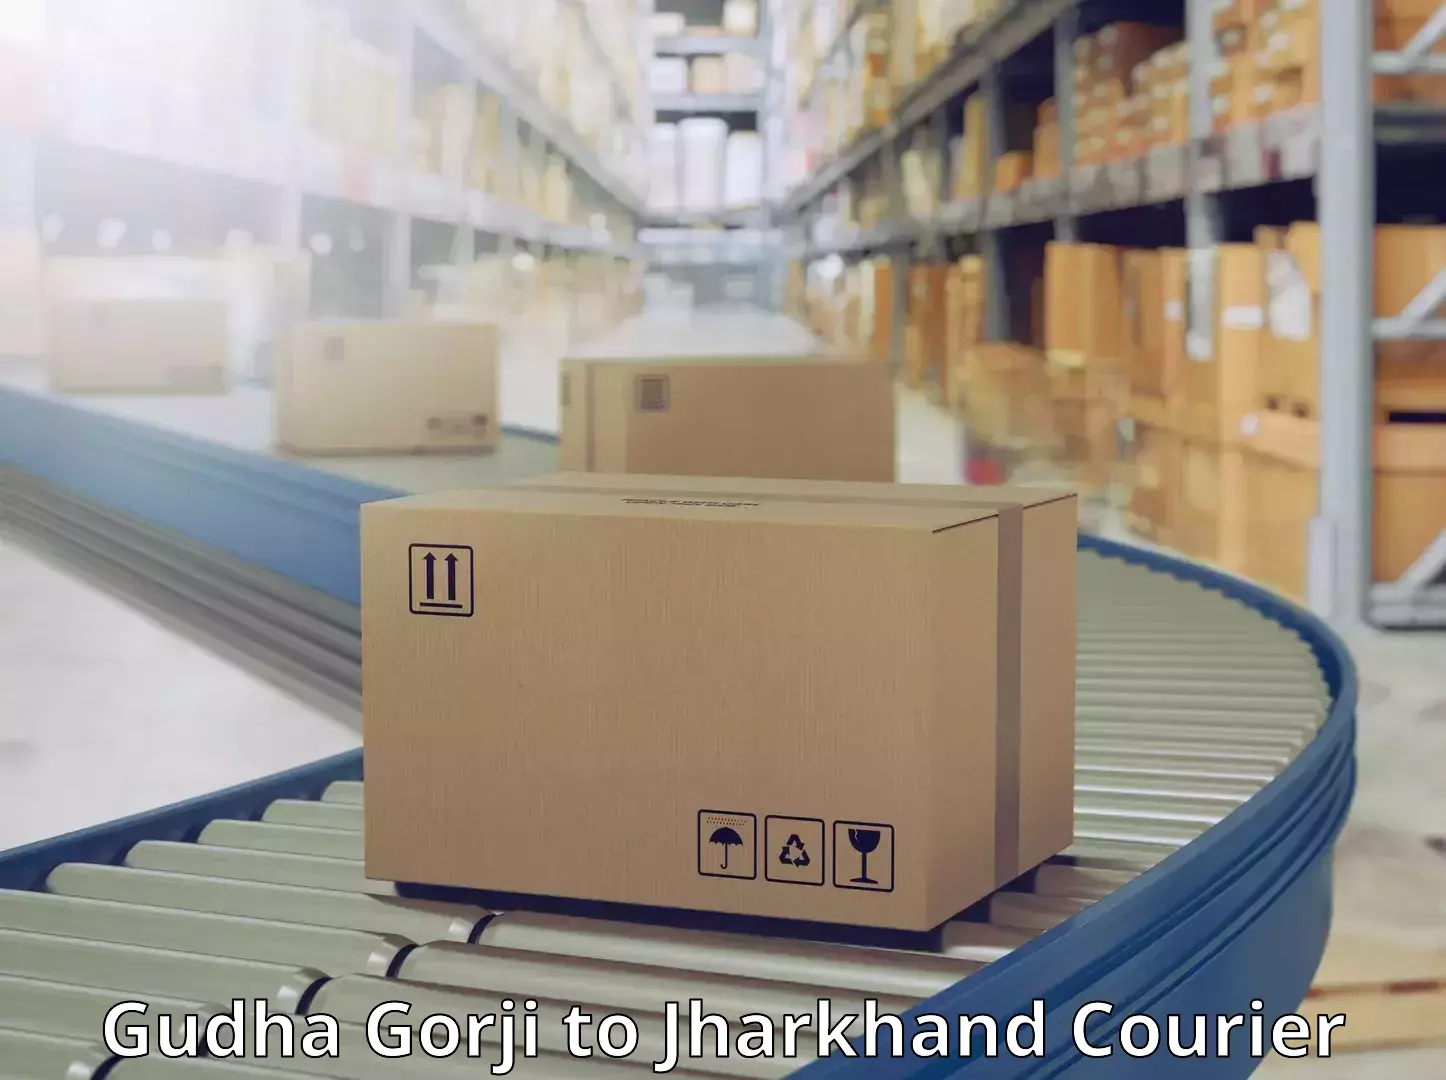 Express courier facilities in Gudha Gorji to Jharkhand